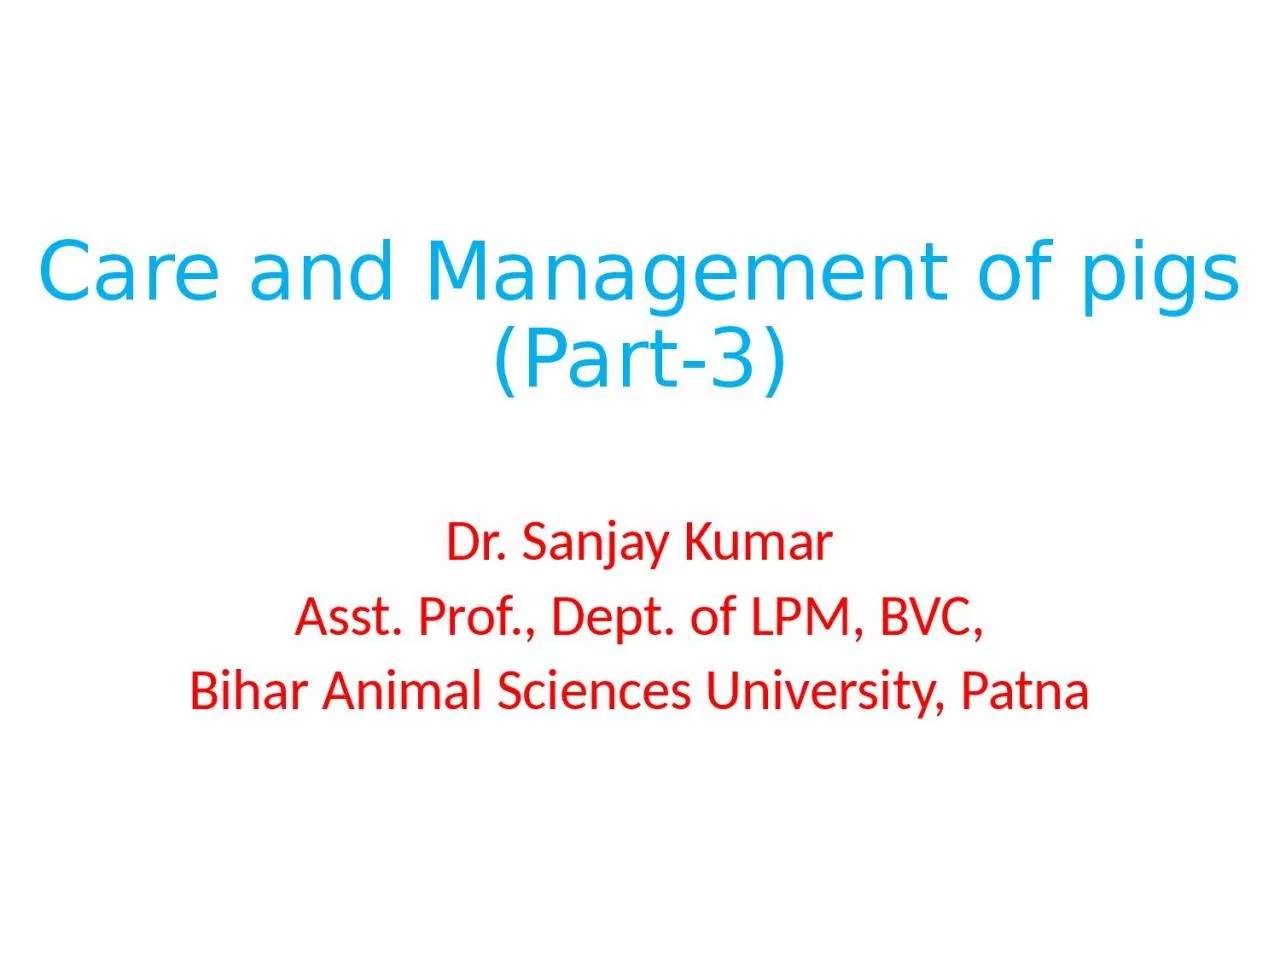 Care and Management of pigs